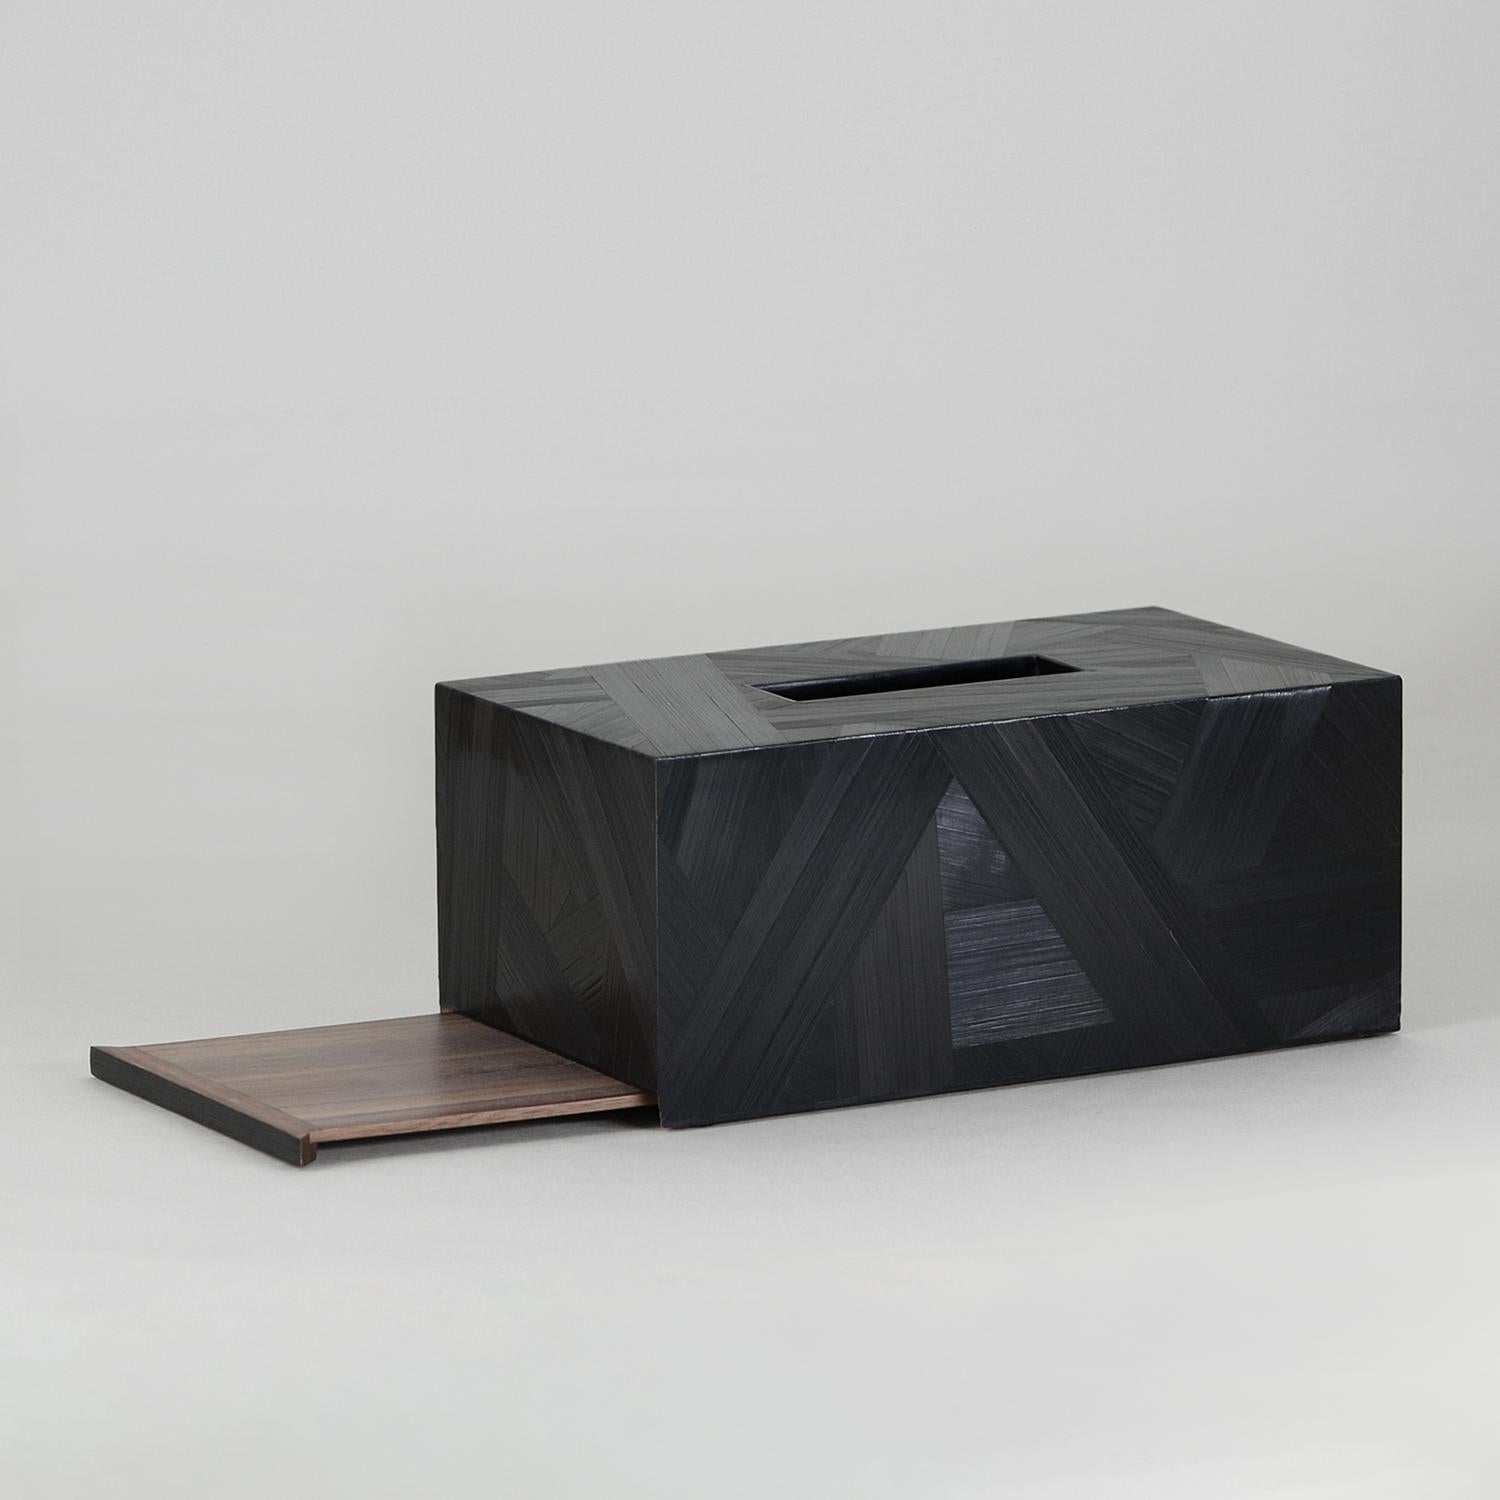 Art Deco Straw Marquetry Forest Tissue Box Long in Ebony Colour by Alexander Lamont For Sale